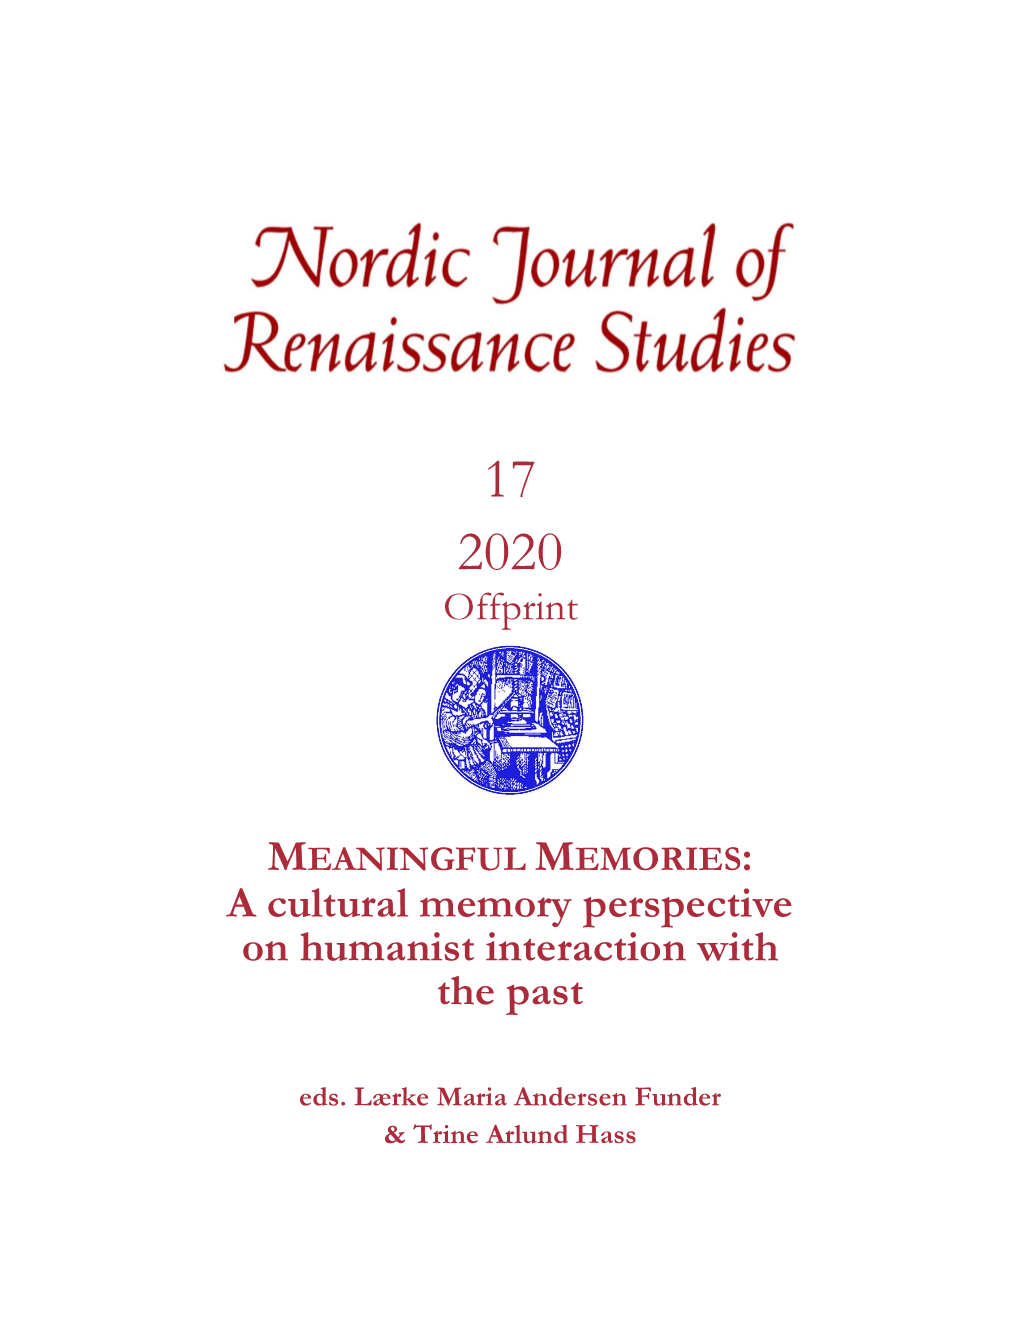 A Cultural Memory Perspective on Humanist Interaction with the Past